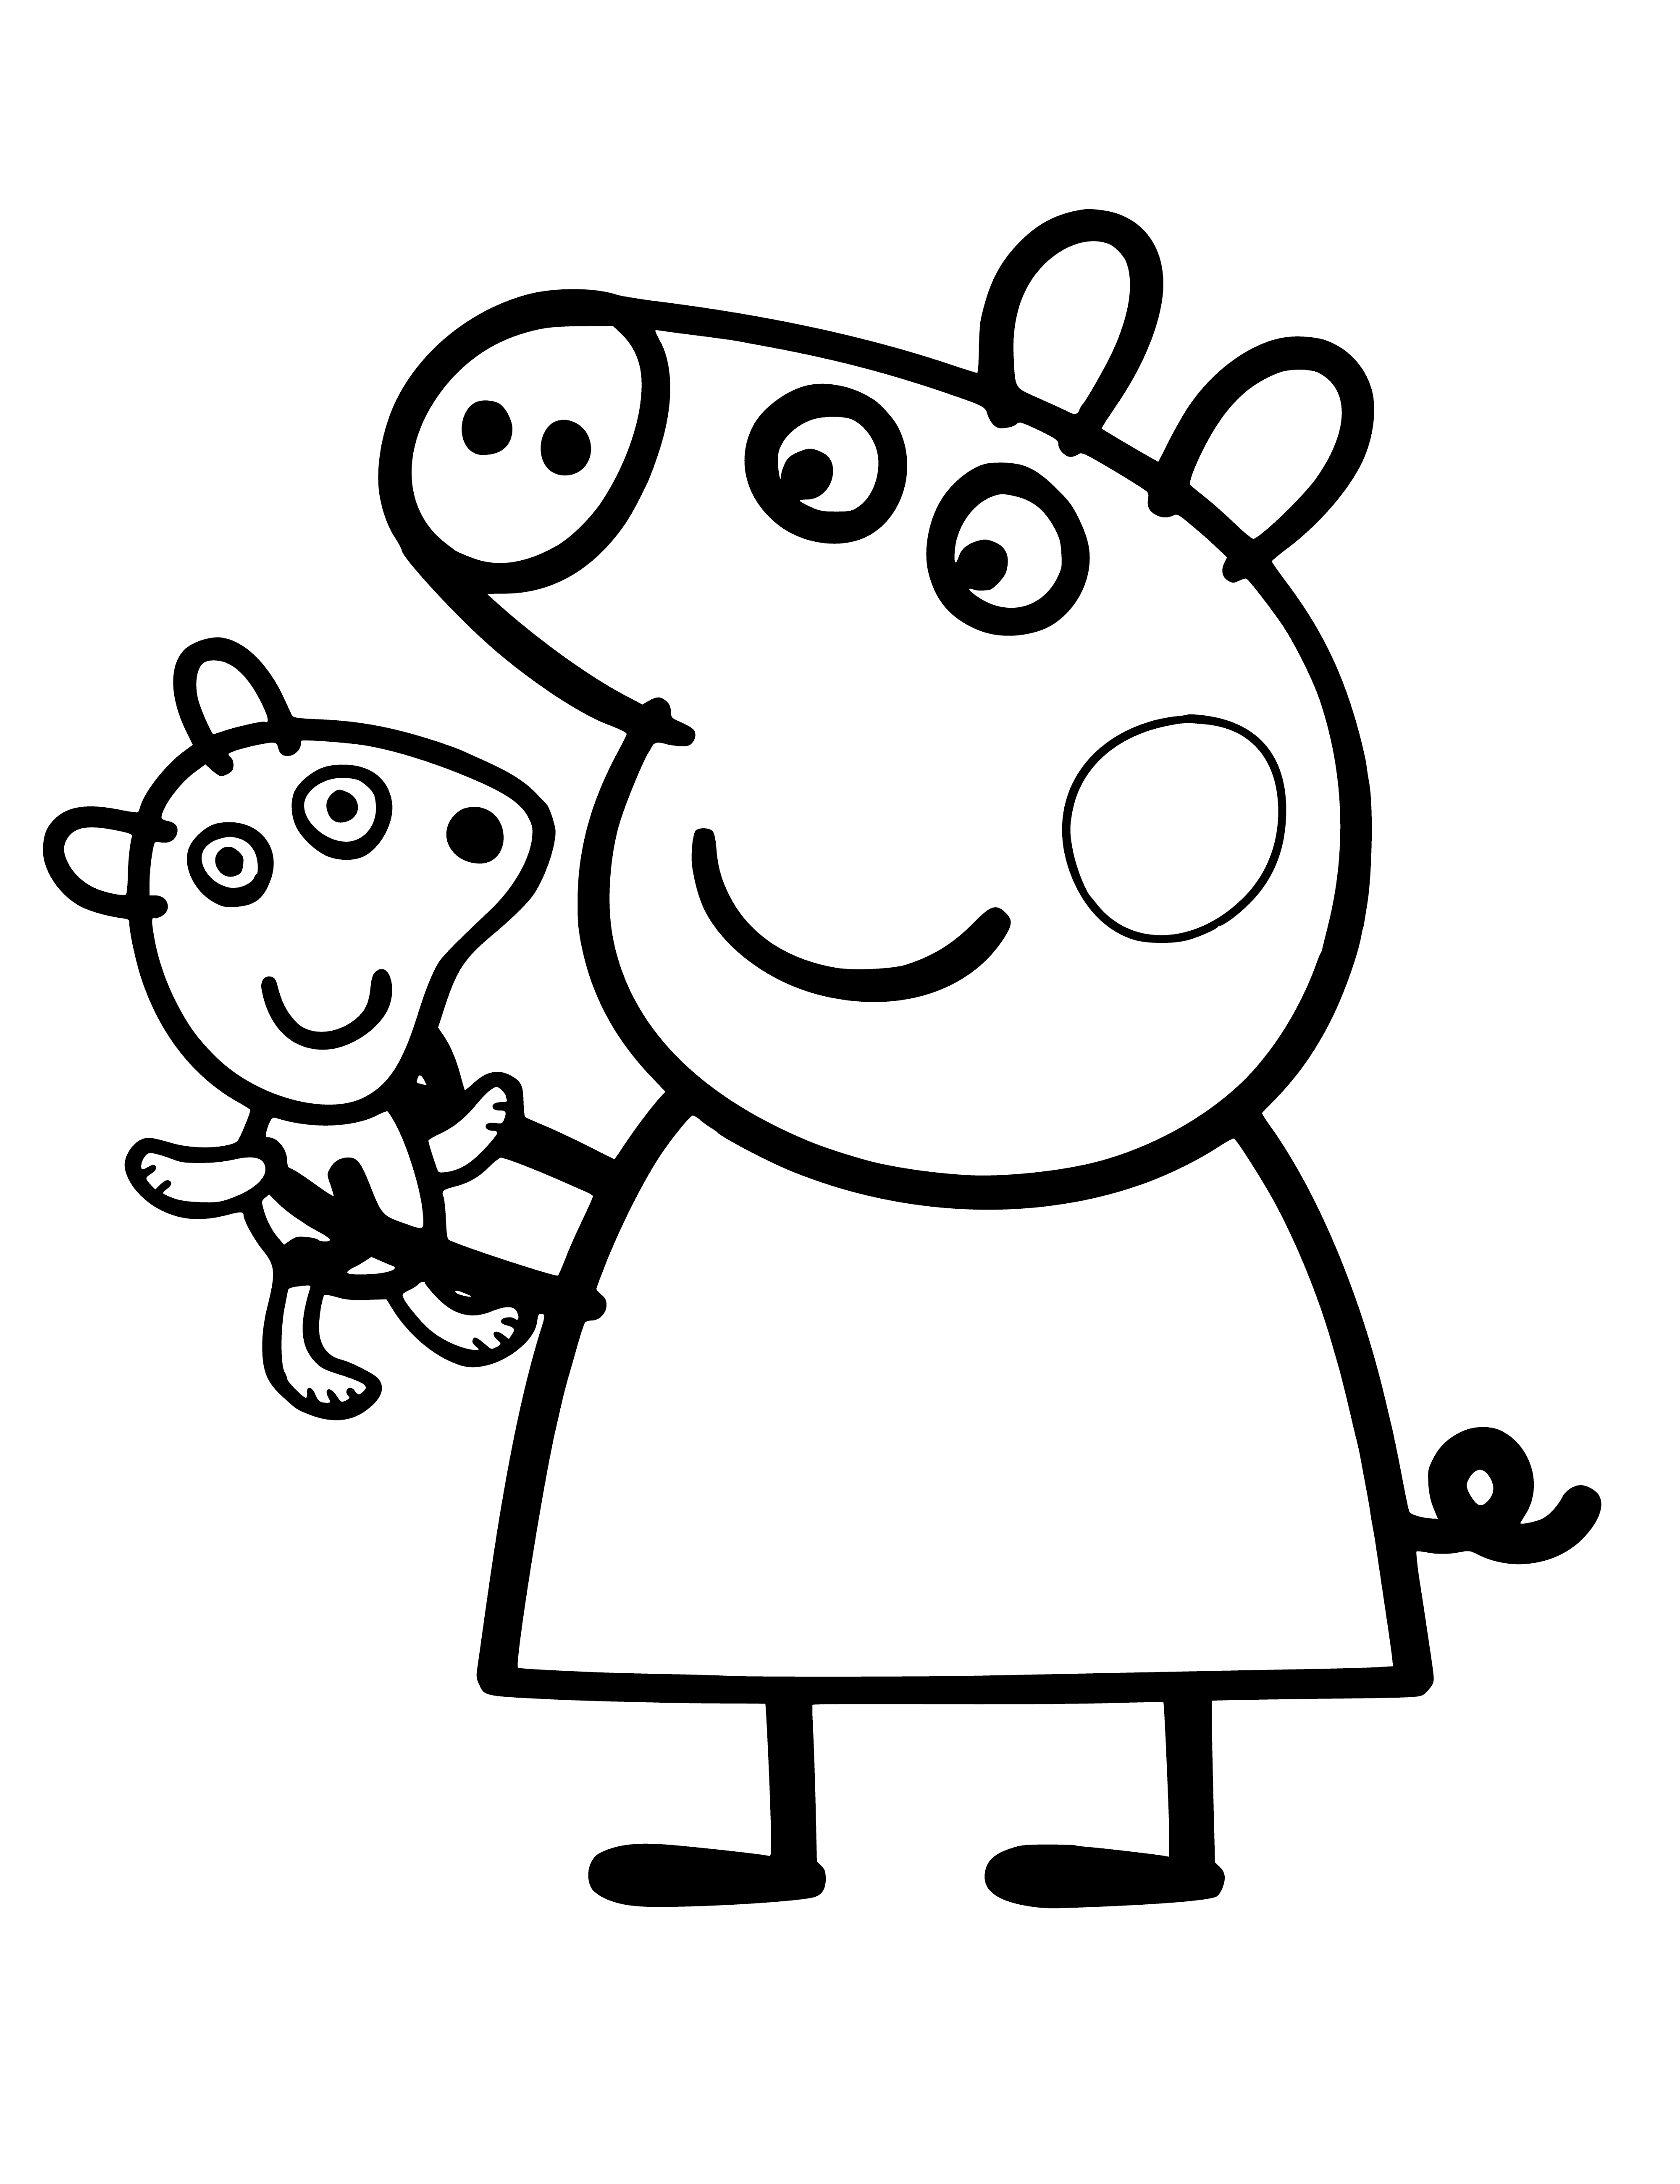 coloring page: Peppa Pig is excitedly holding a ripe, juicy pear in the coloring page.